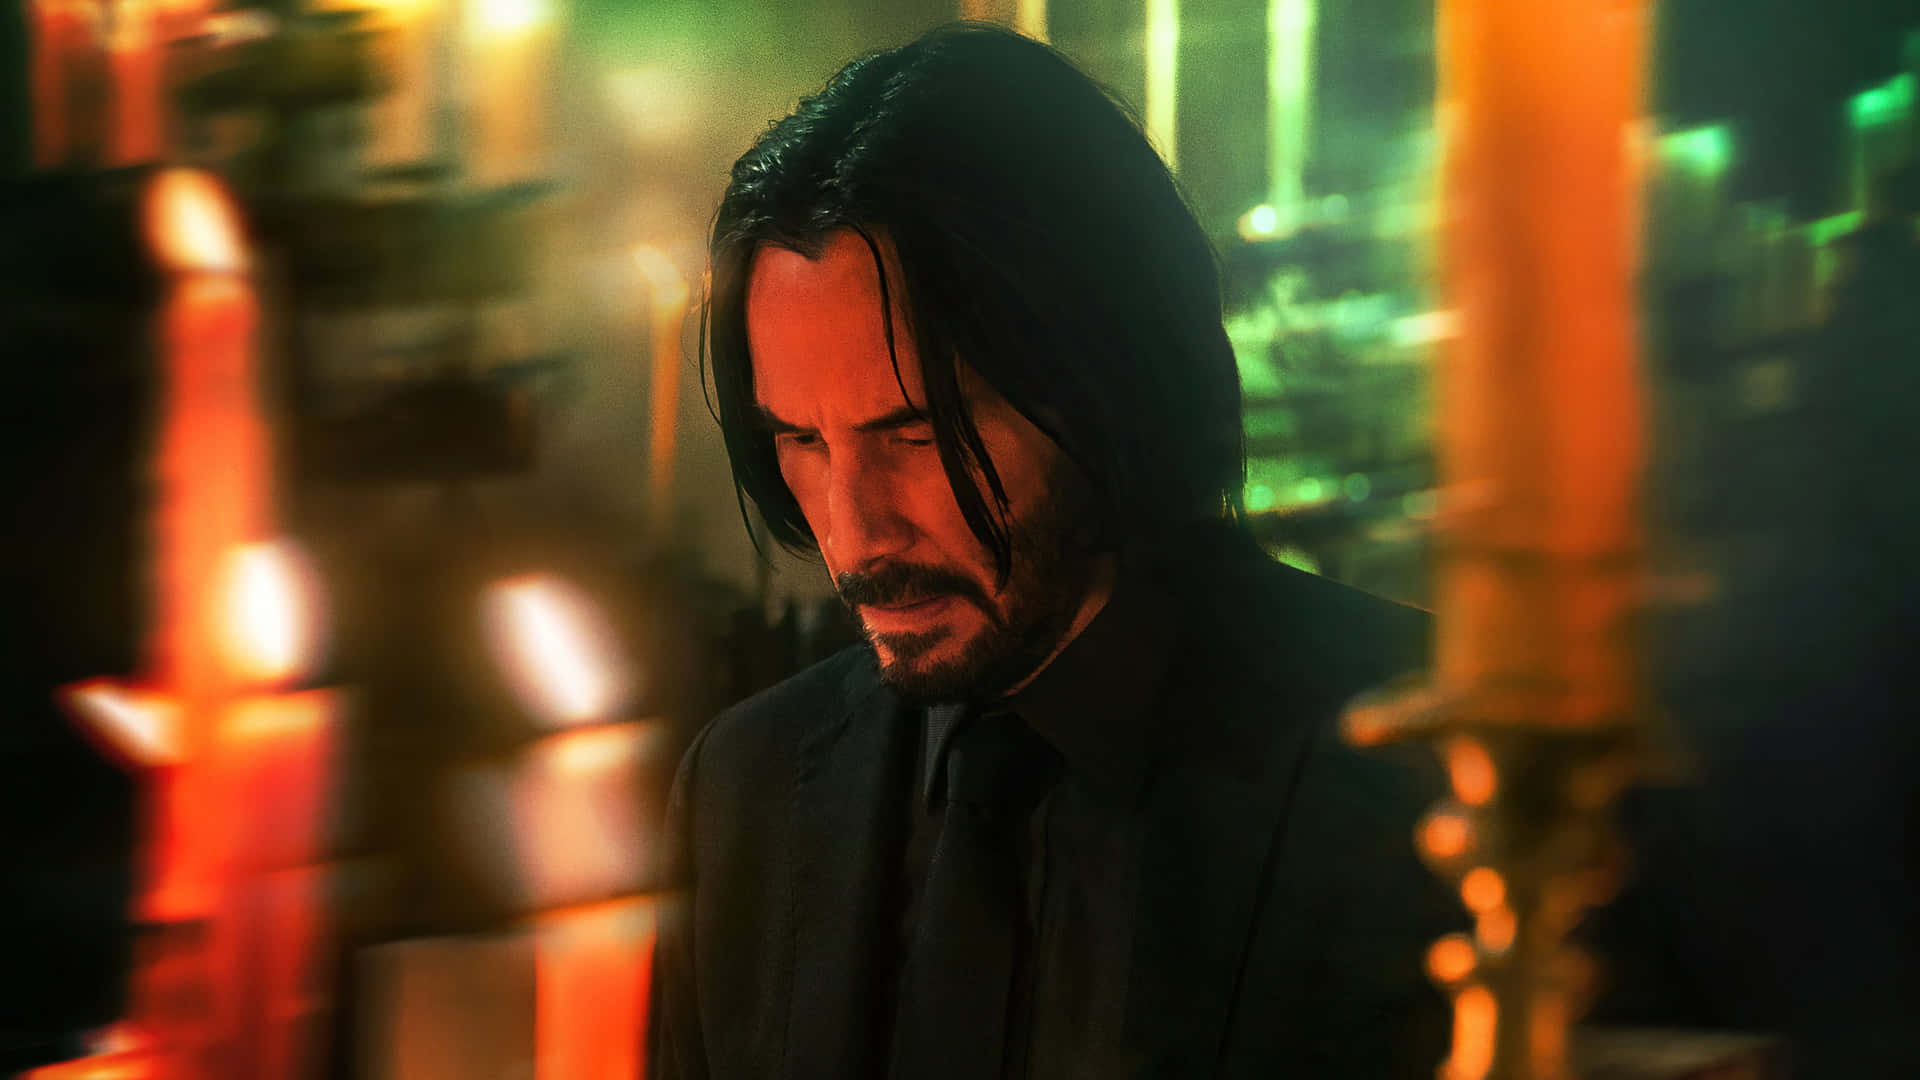 Hollywood megastar Keanu Reeves in a stunning high-definition background image.